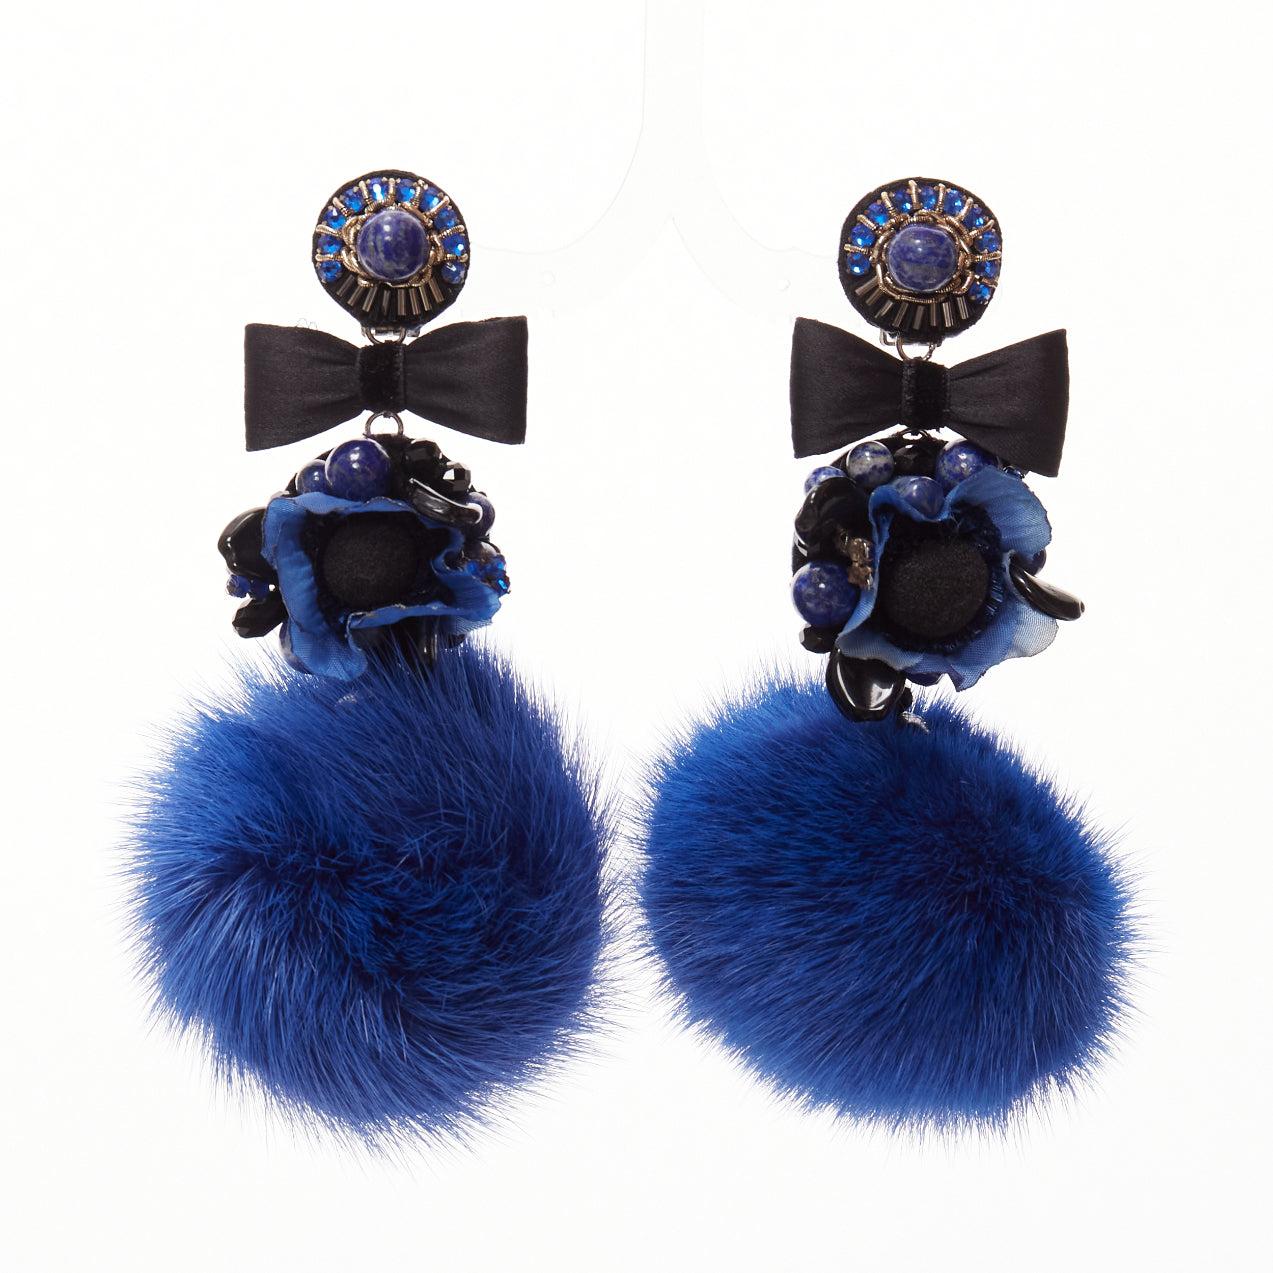 RANJANA KHAN blue black real fur crystal dangling clip on earrings
Reference: AAWC/A01218
Brand: Ranjana Khan
Material: Fur, Fabric
Color: Blue, Black
Pattern: Solid
Closure: Clip On
Lining: Blue Leather
Extra Details: Blue leather